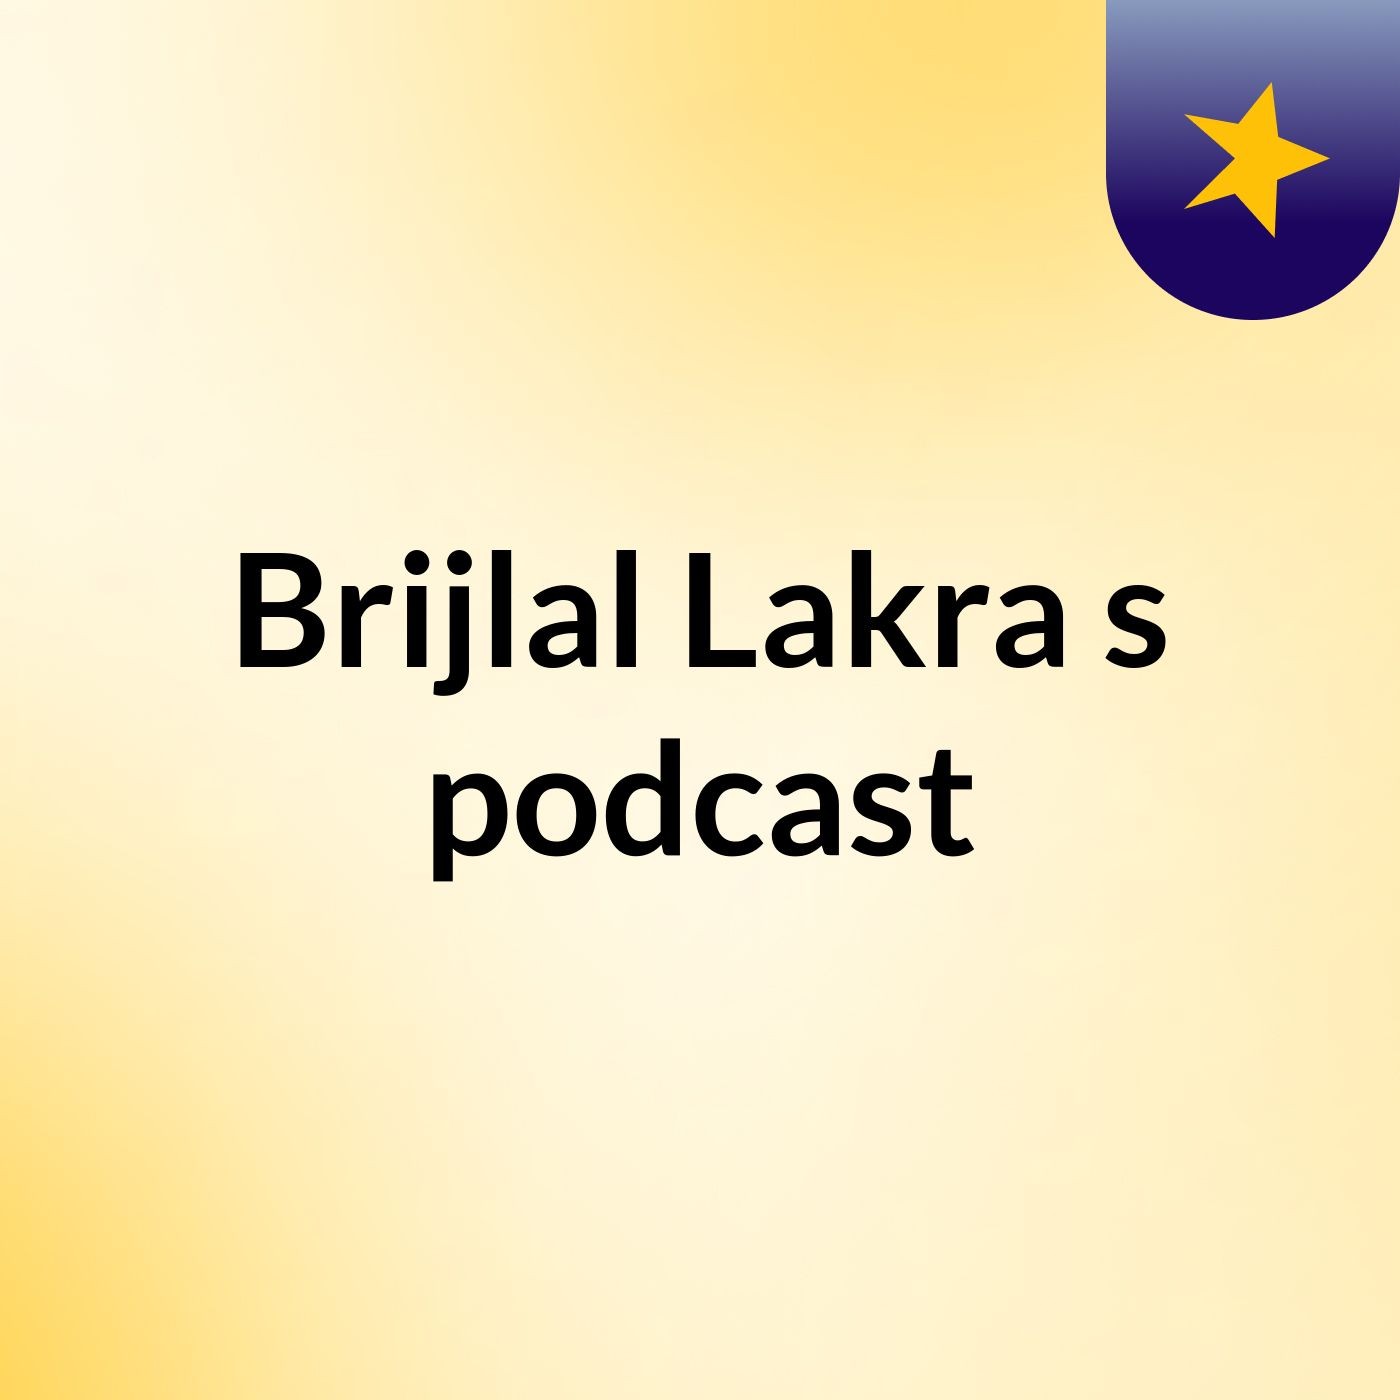 Episode 3 - Brijlal Lakra's podcast